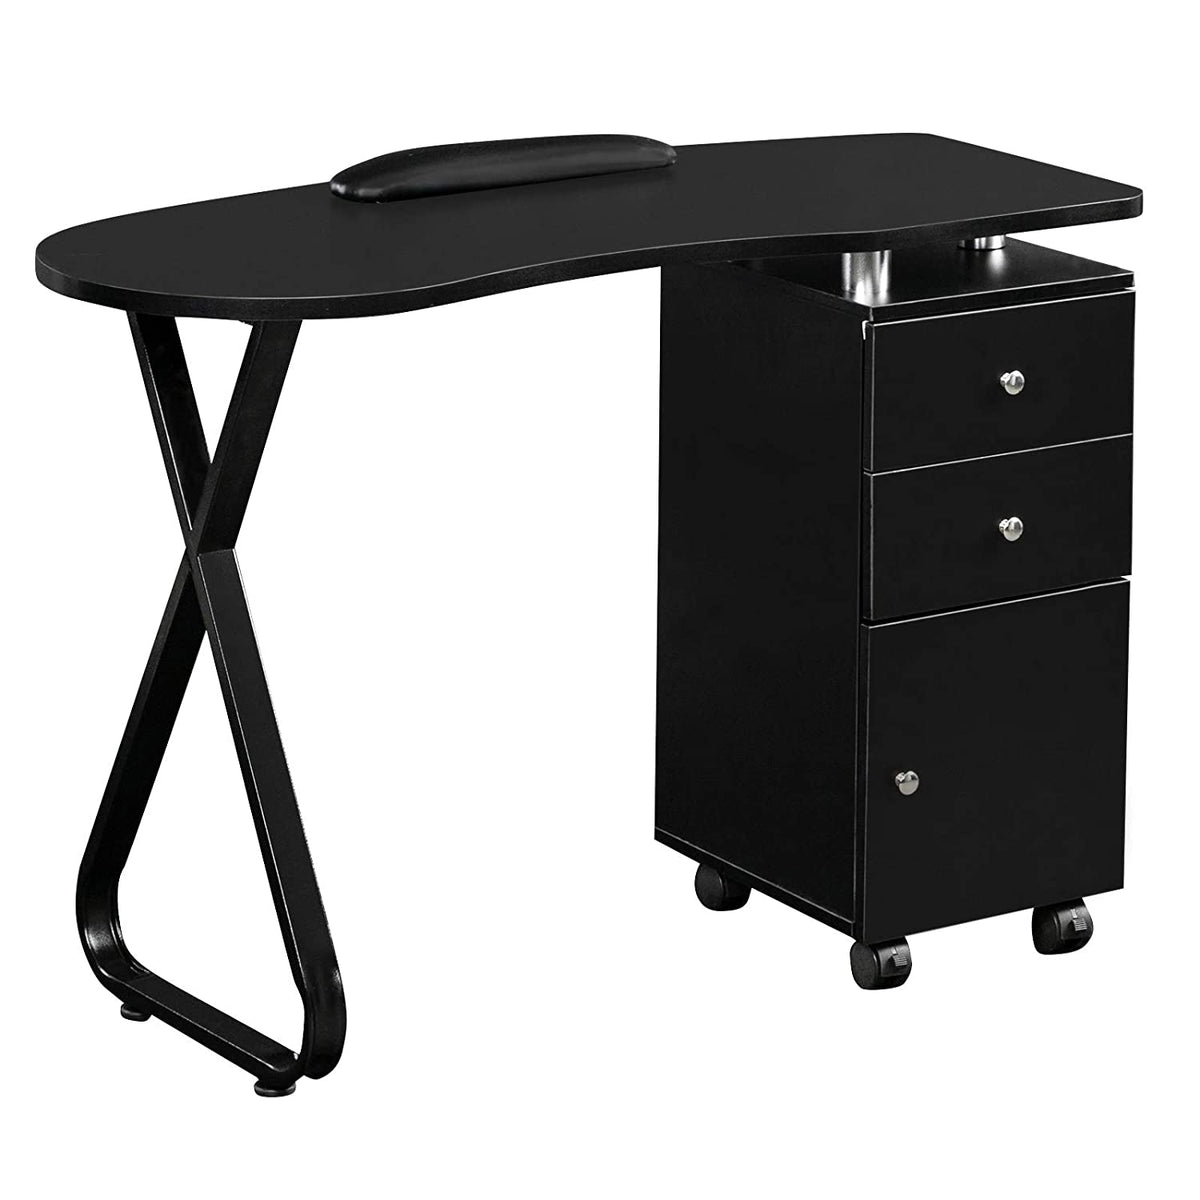 OmySalon Manicure Table Nail Desk with Wheels Black